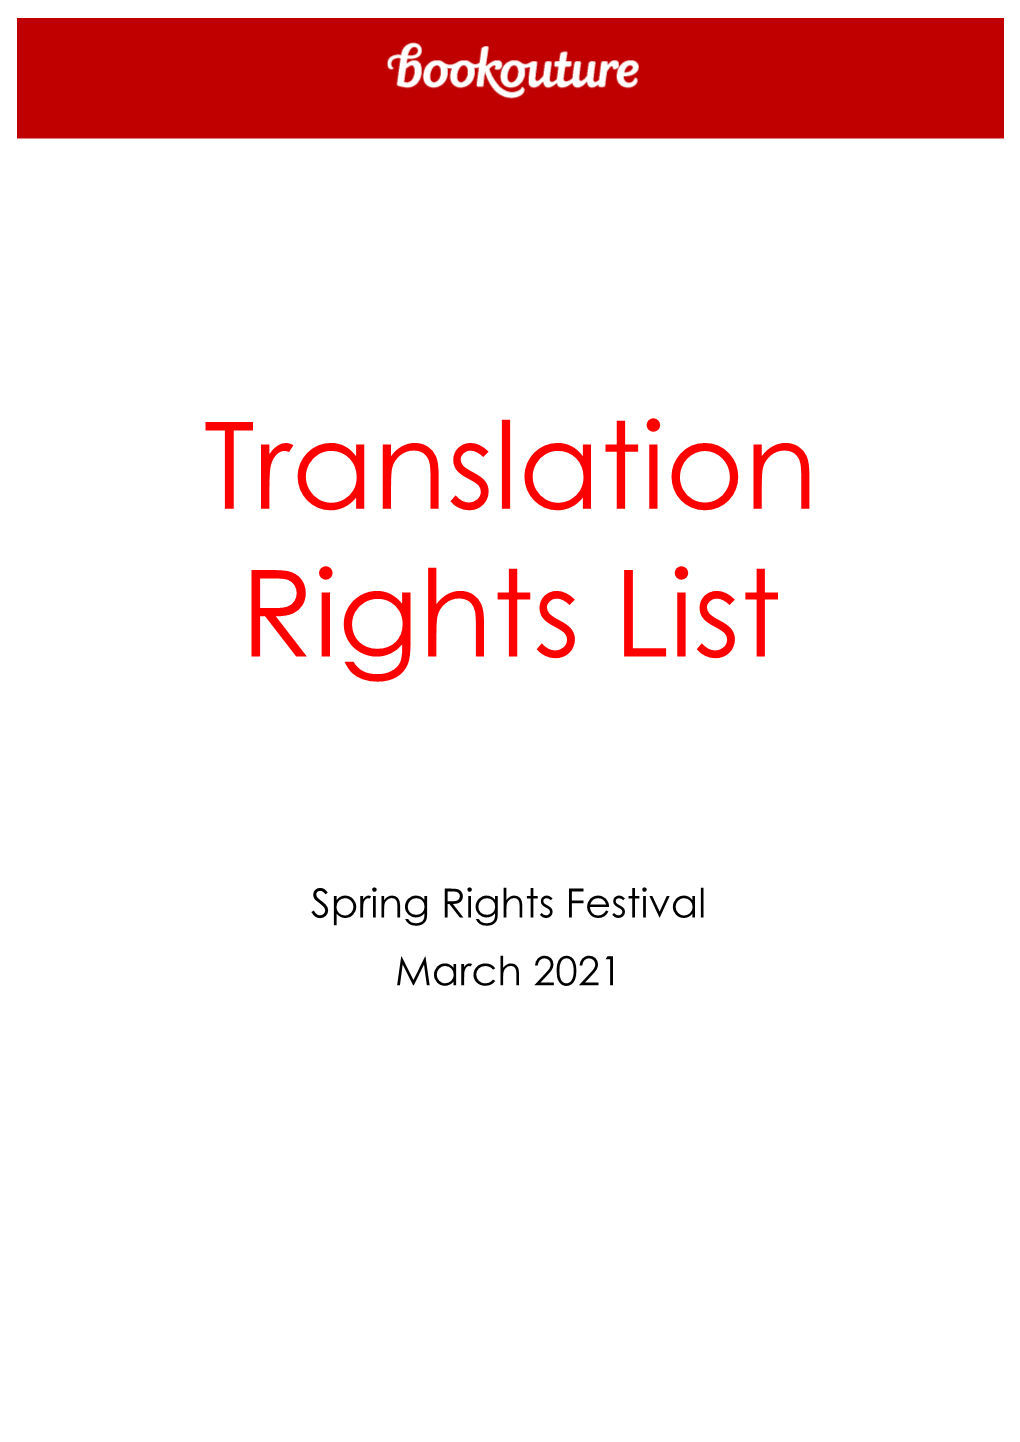 Spring Rights Festival March 2021